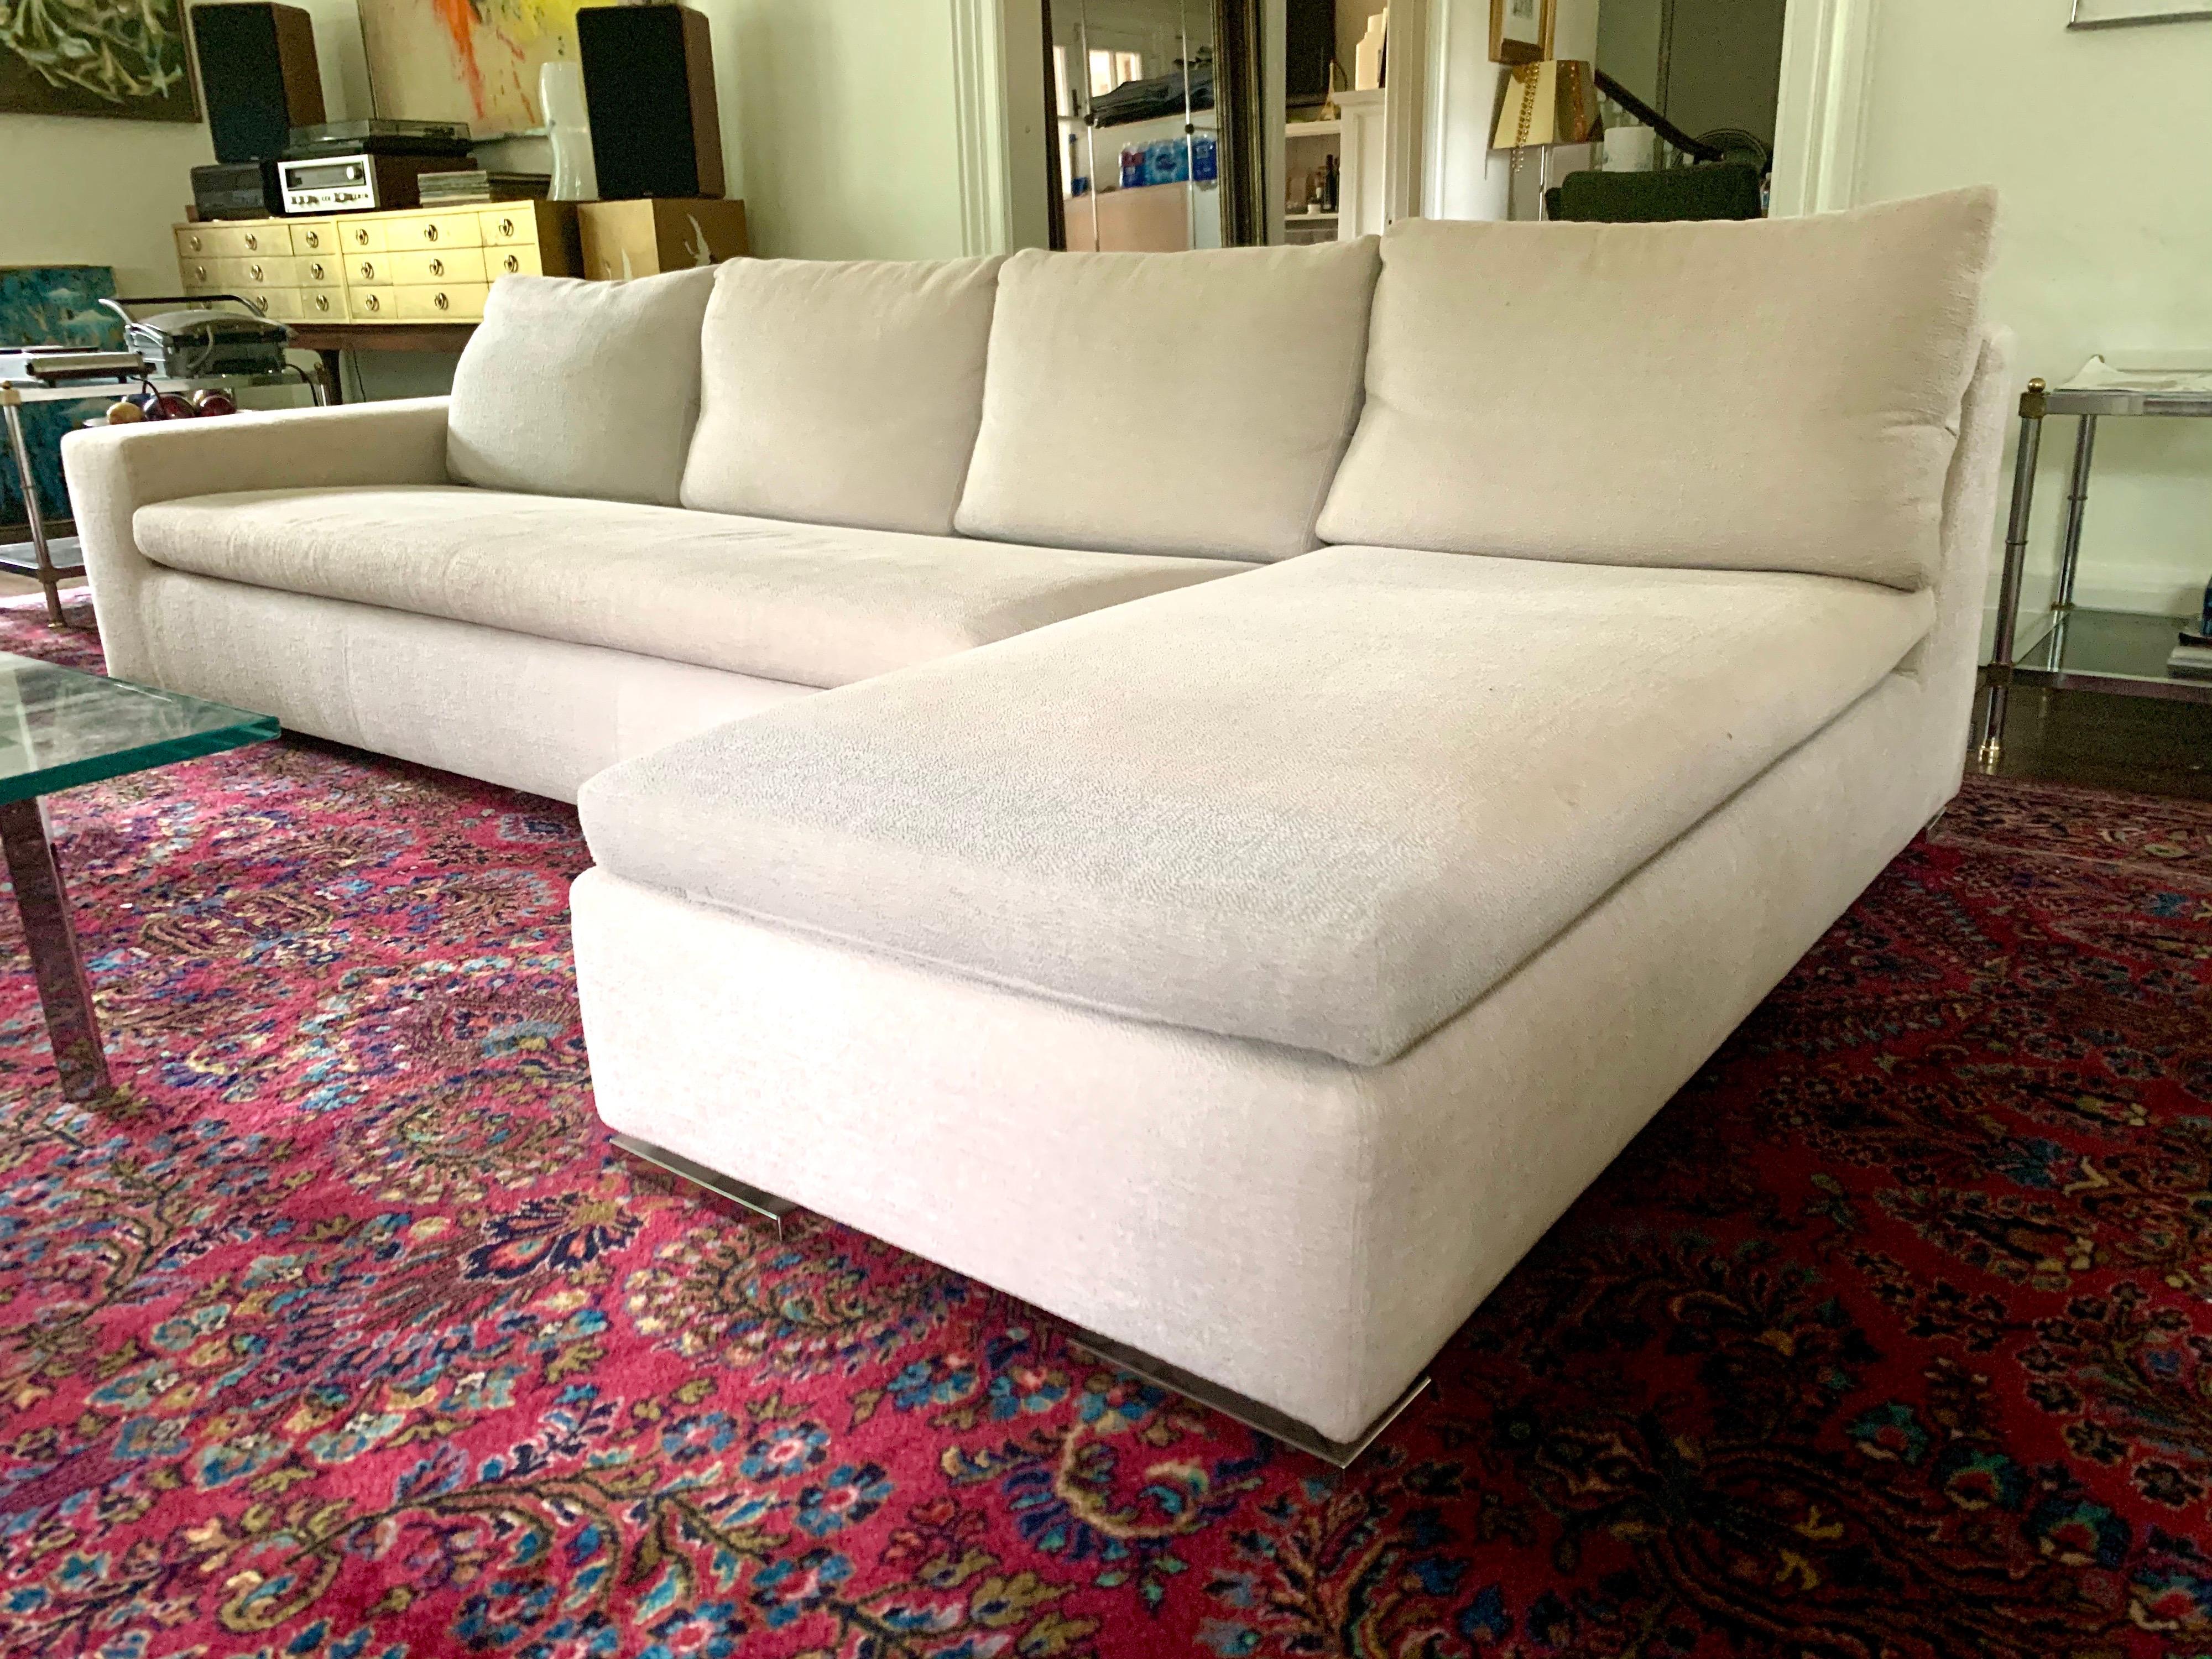 Minotti Signed Floating Sectional Sofa Made in Italy im Zustand „Gut“ in West Hartford, CT